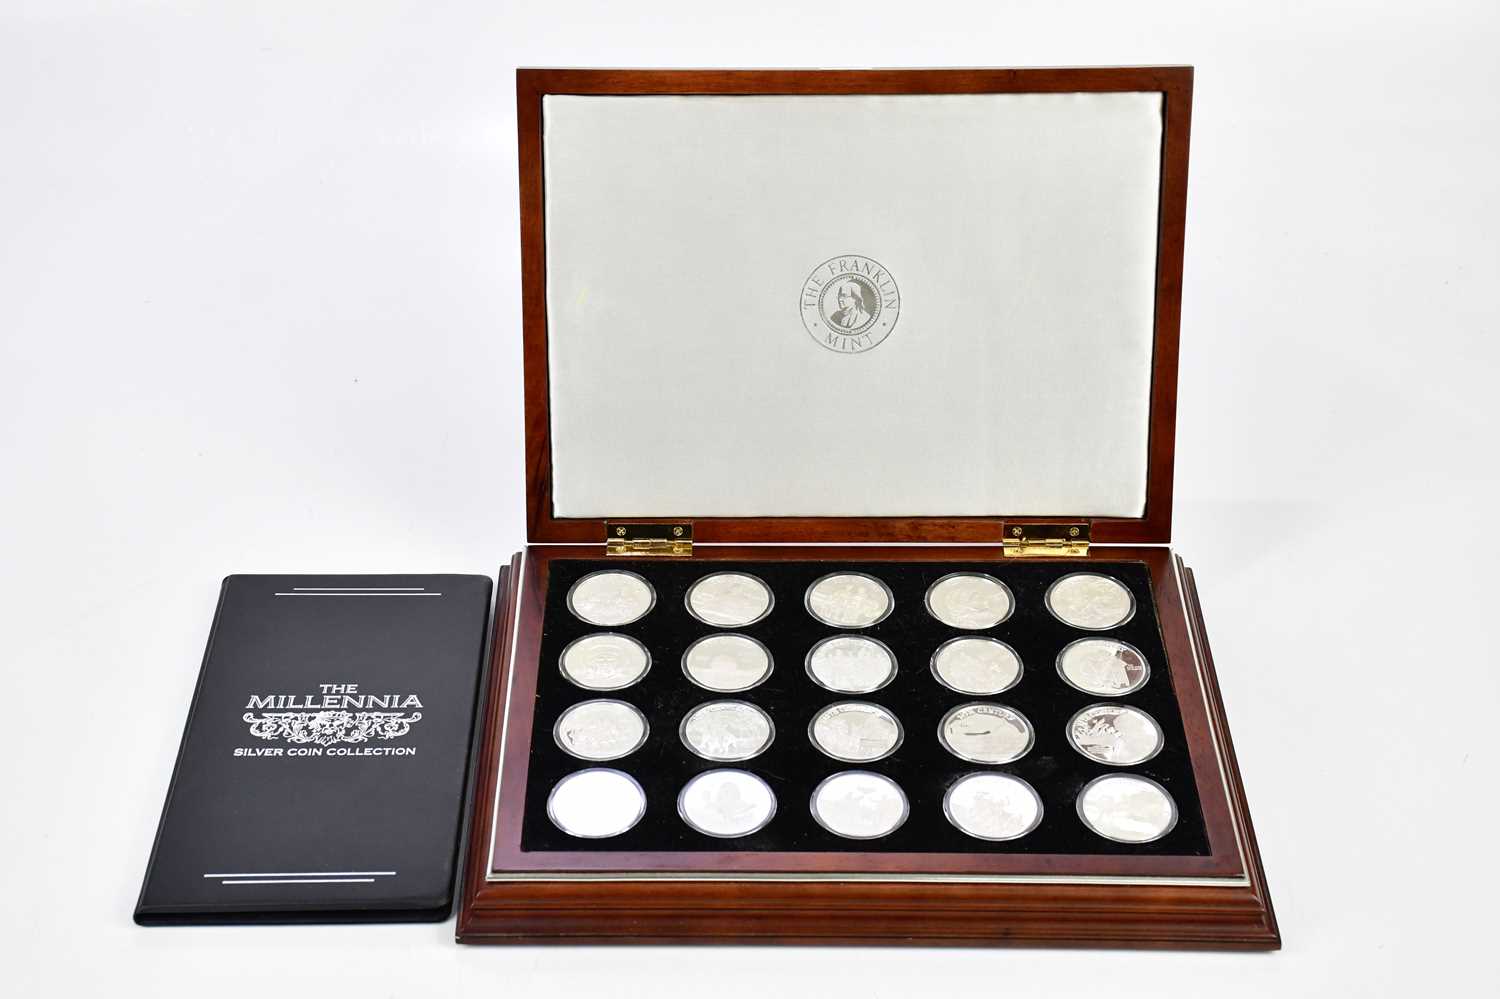 THE FRANKLIN MINT; a cased set of twenty silver coins to celebrate the advent of a new millenium